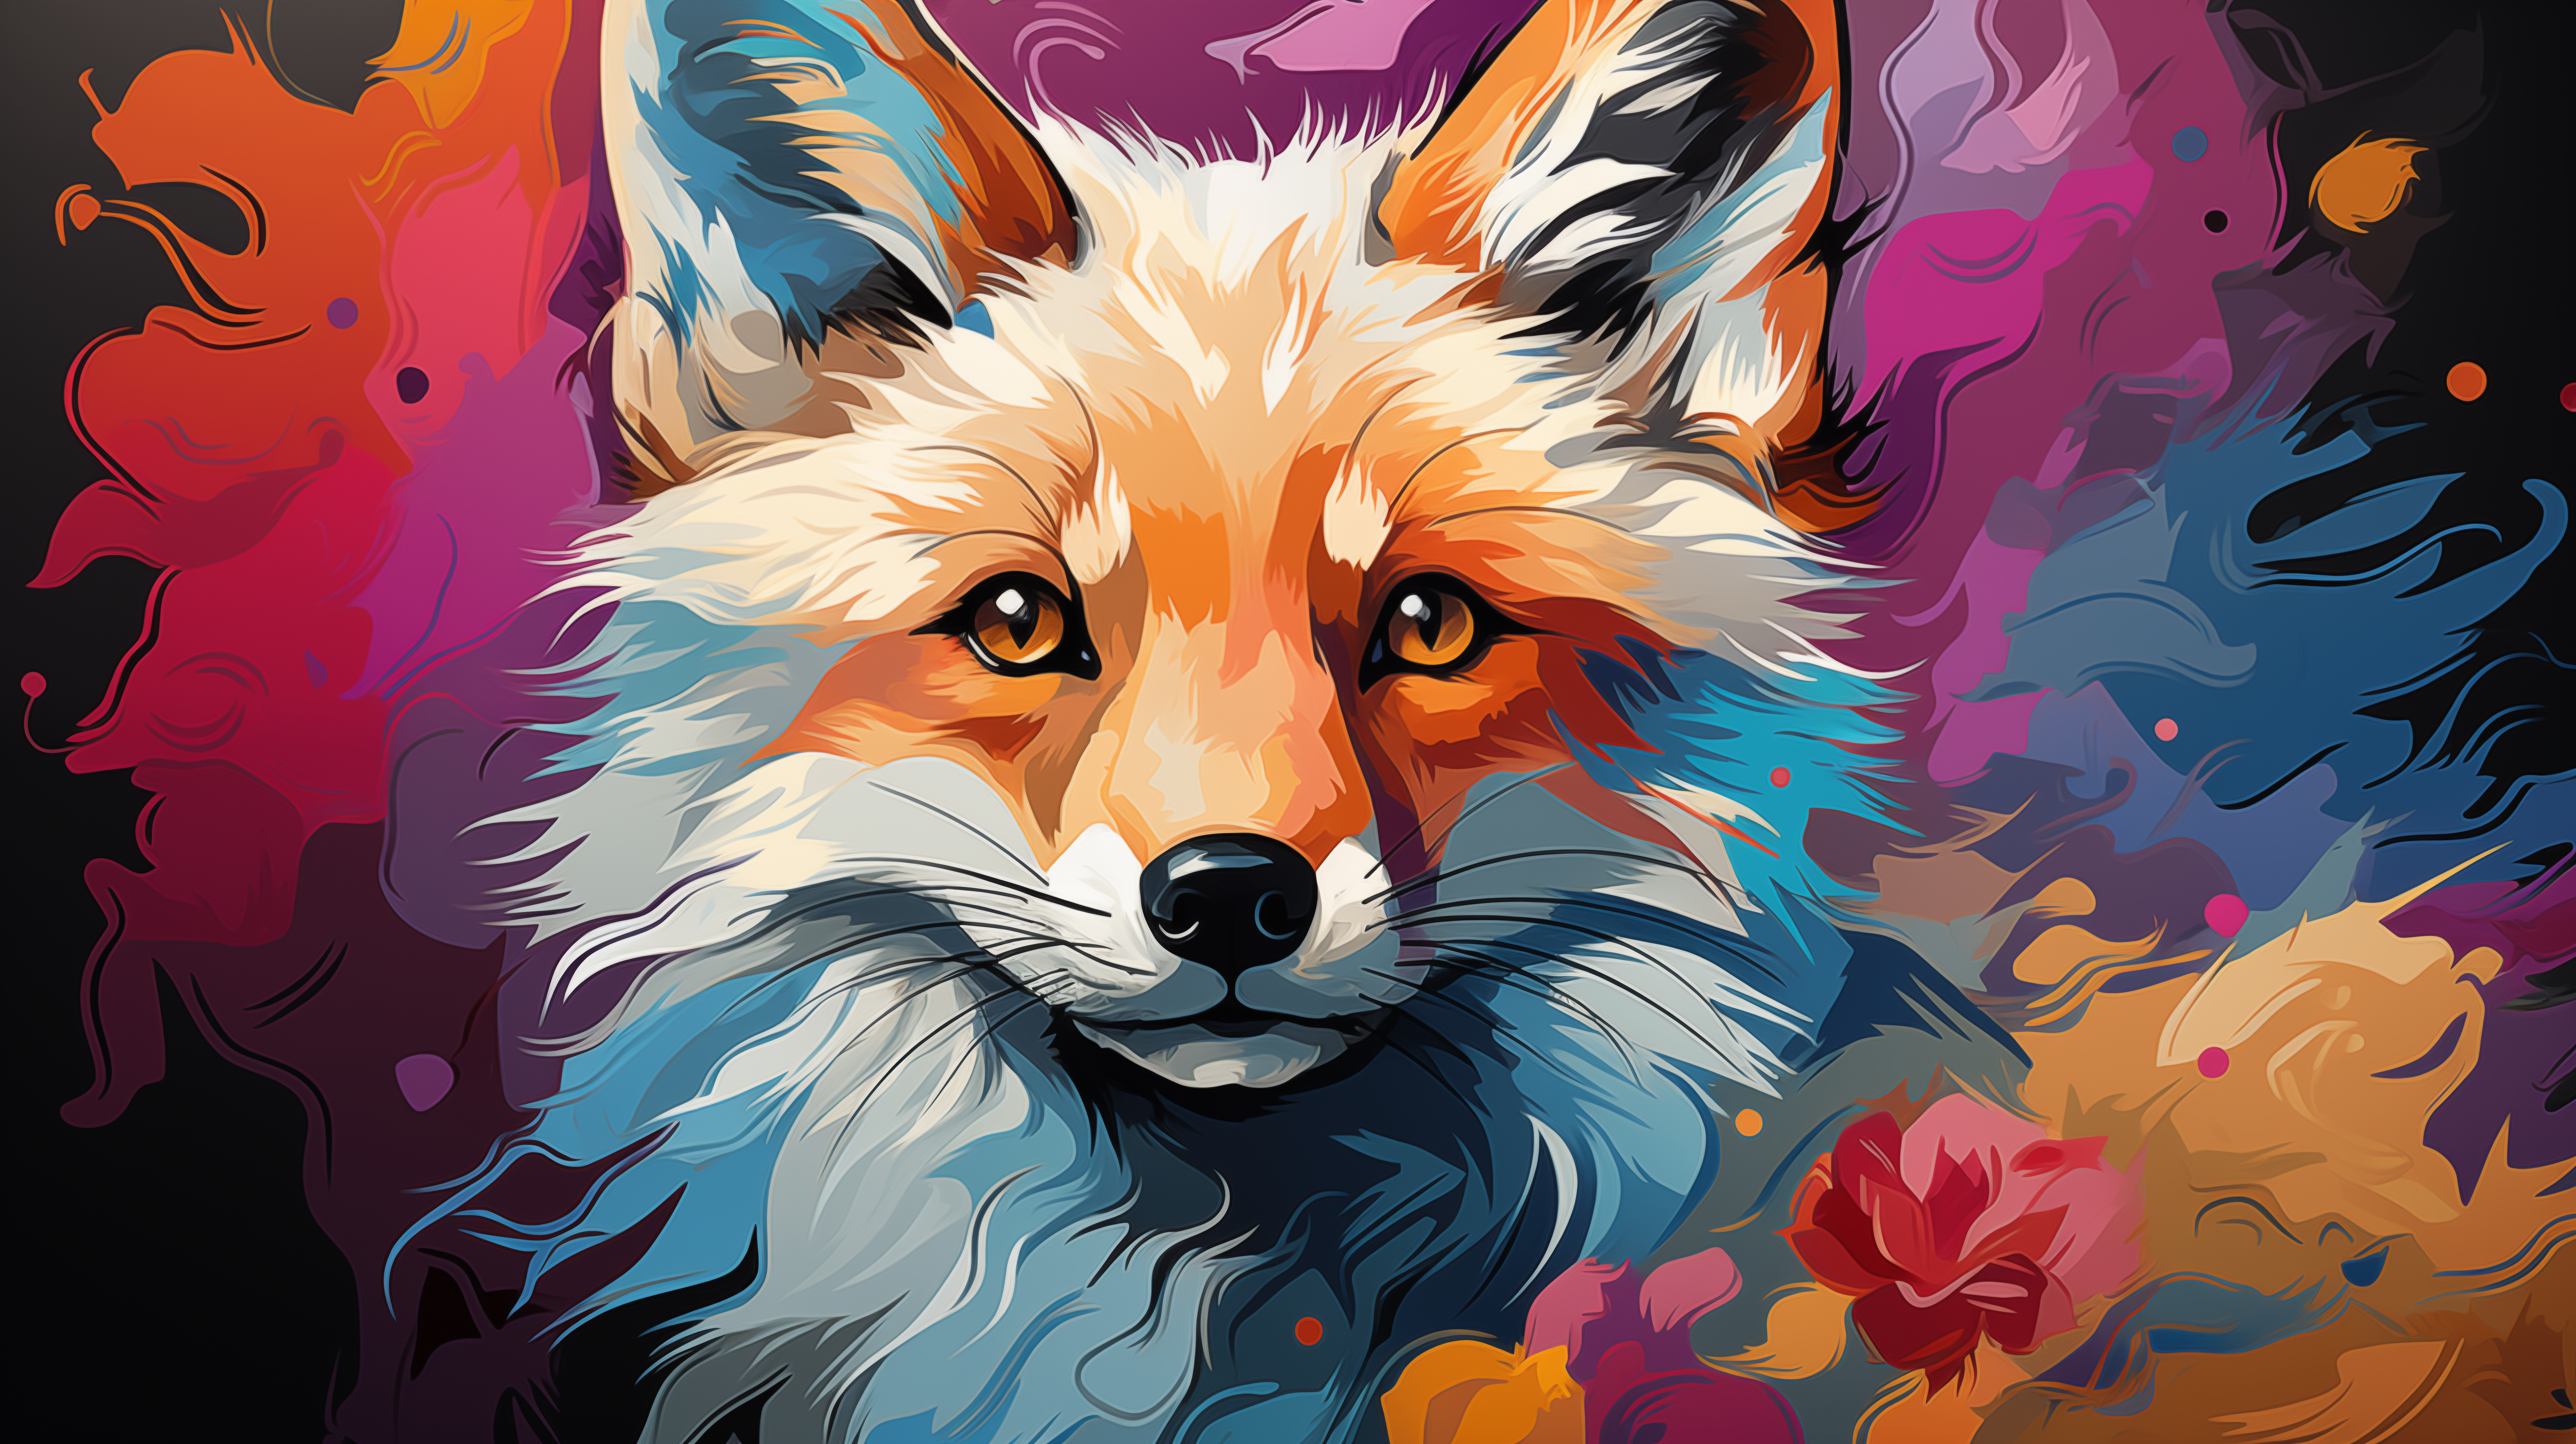 Alt-text: Colorful HD desktop wallpaper featuring an artistic rendition of a fox with vibrant abstract background.